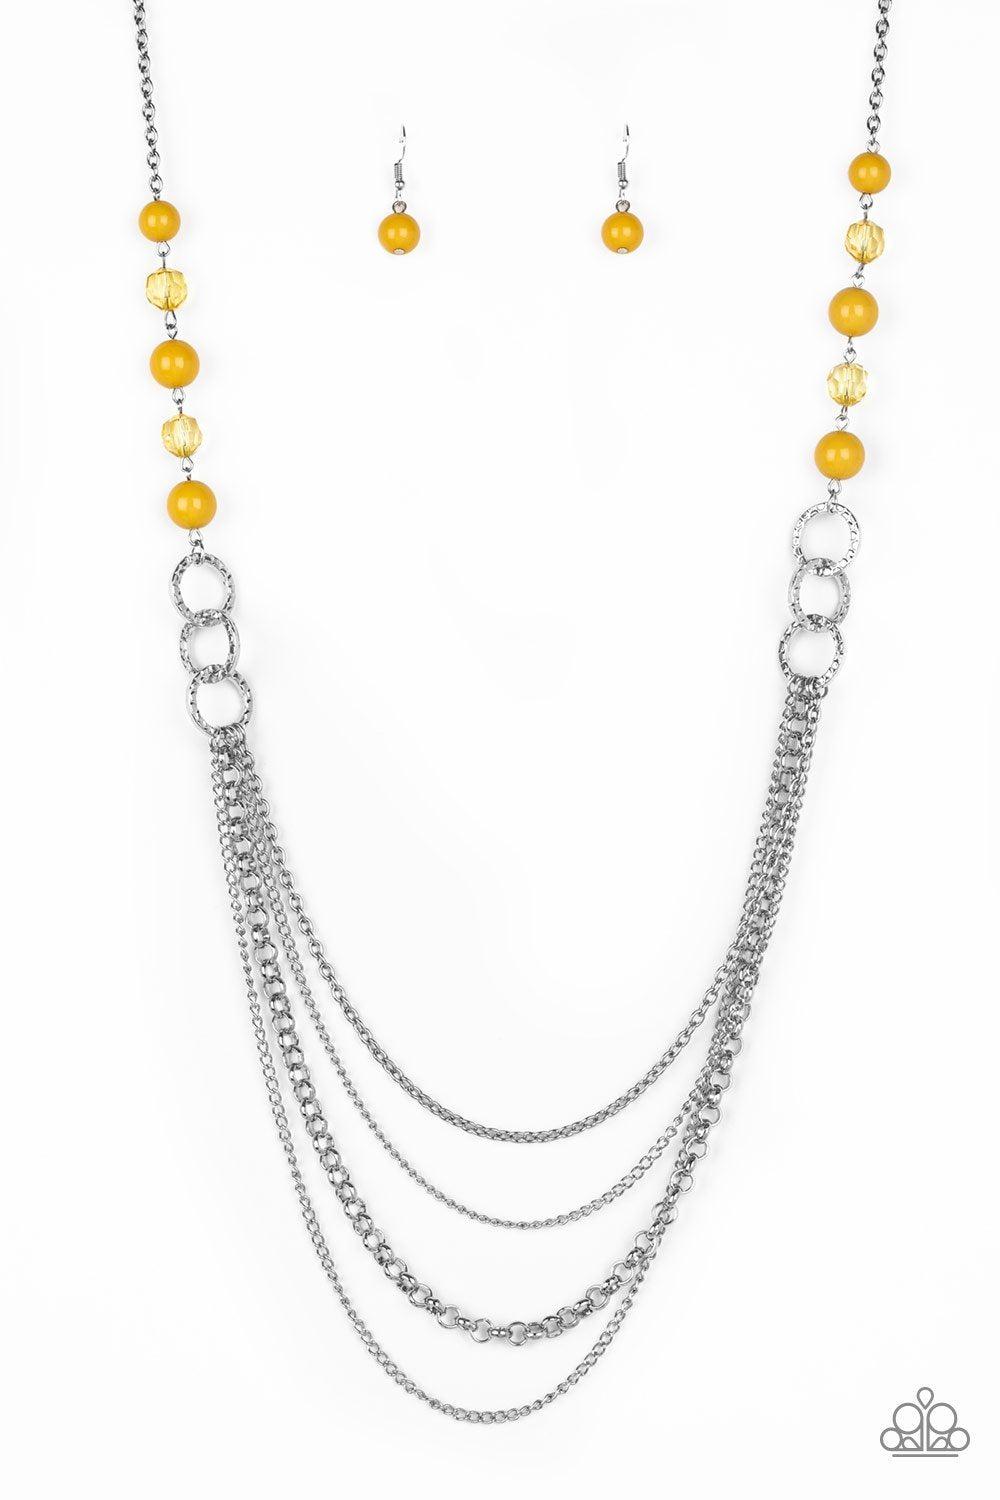 Vividly Vivid Yellow Necklace - Paparazzi Accessories-CarasShop.com - $5 Jewelry by Cara Jewels